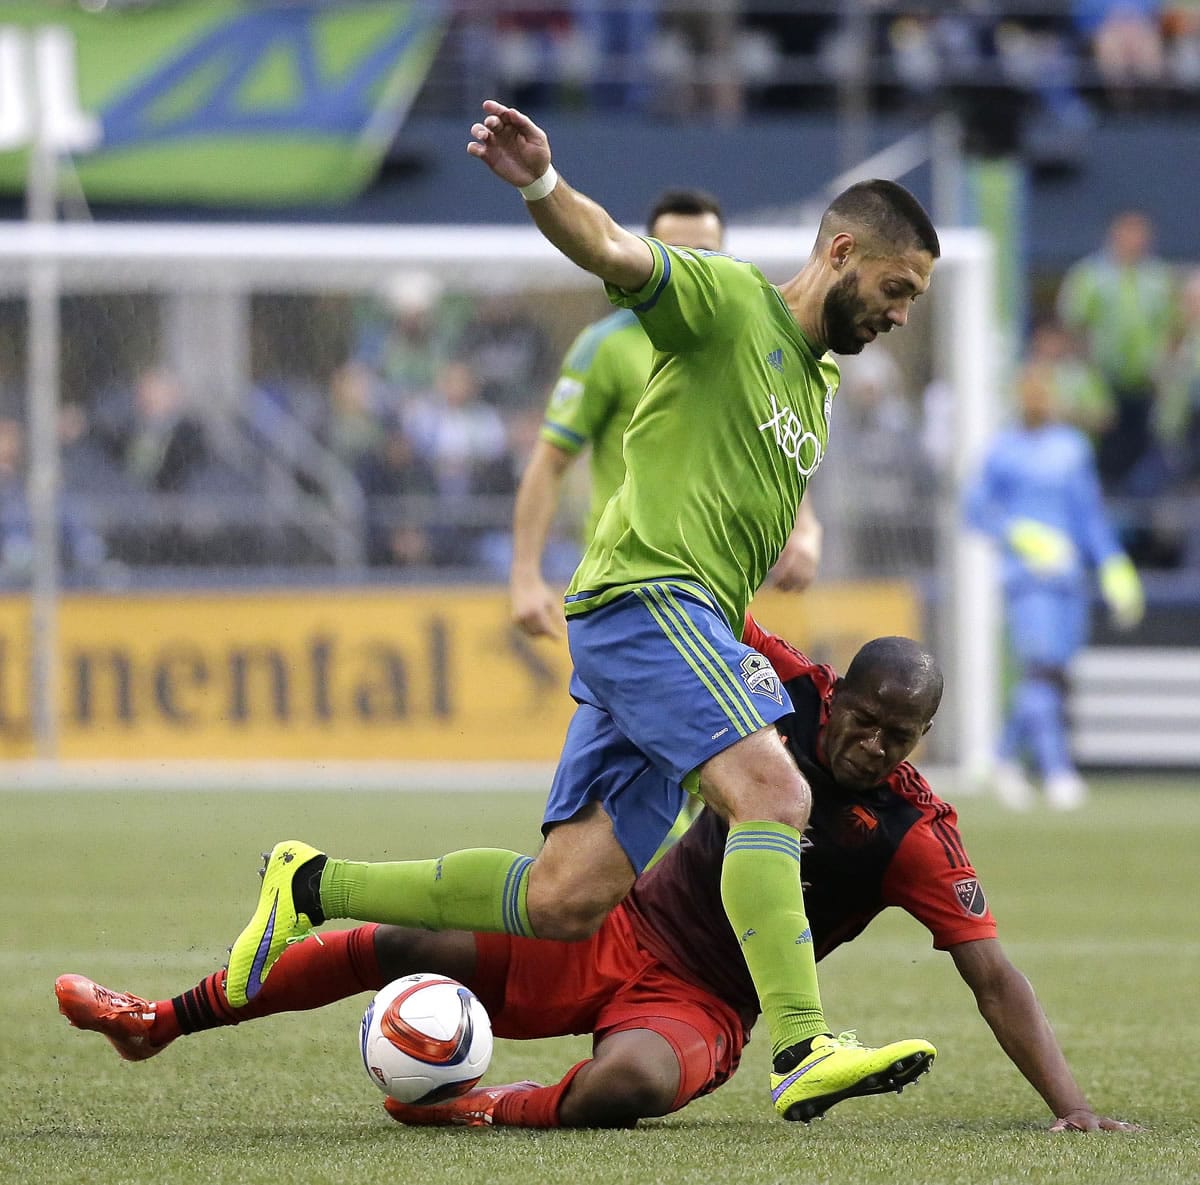 Seattle Sounders' Clint Dempsey runs with the ball as Portland Timbers' Darlington Nagbe goes down in the first half of an MLS soccer match, Sunday, April 26, 2015, in Seattle.